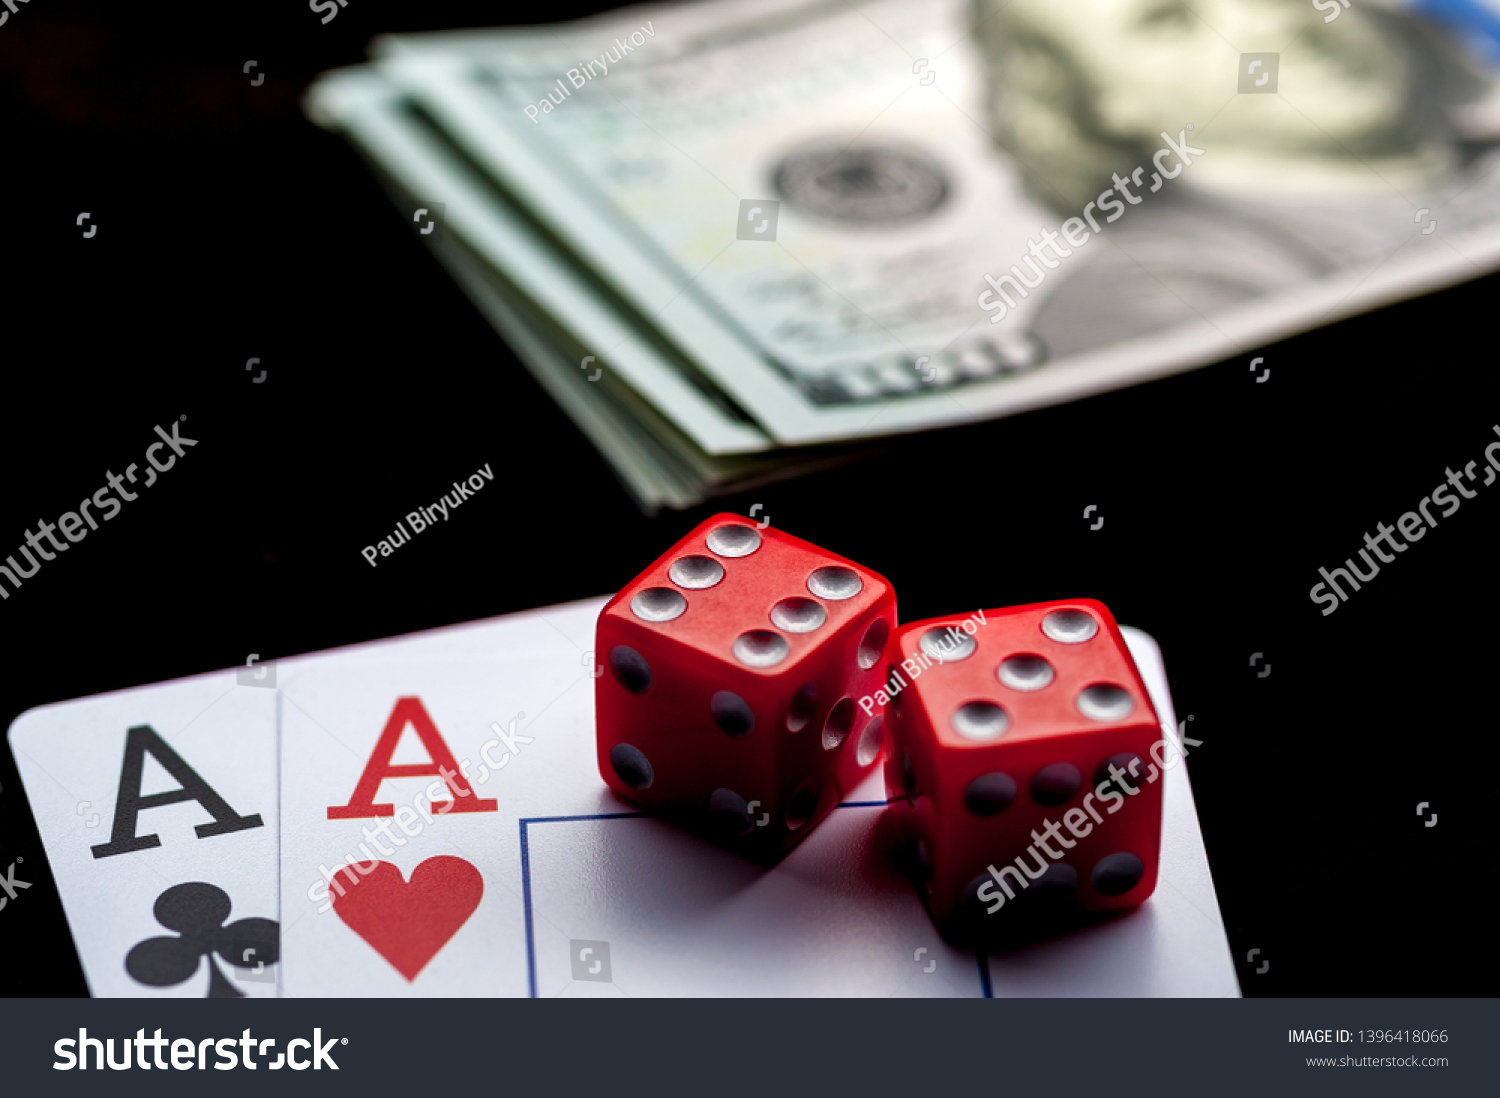 Close-up - Two aces, playing cards, red gaming dices and Stack of american dollars on black table. Casino, gambling game chance concept #1396418066